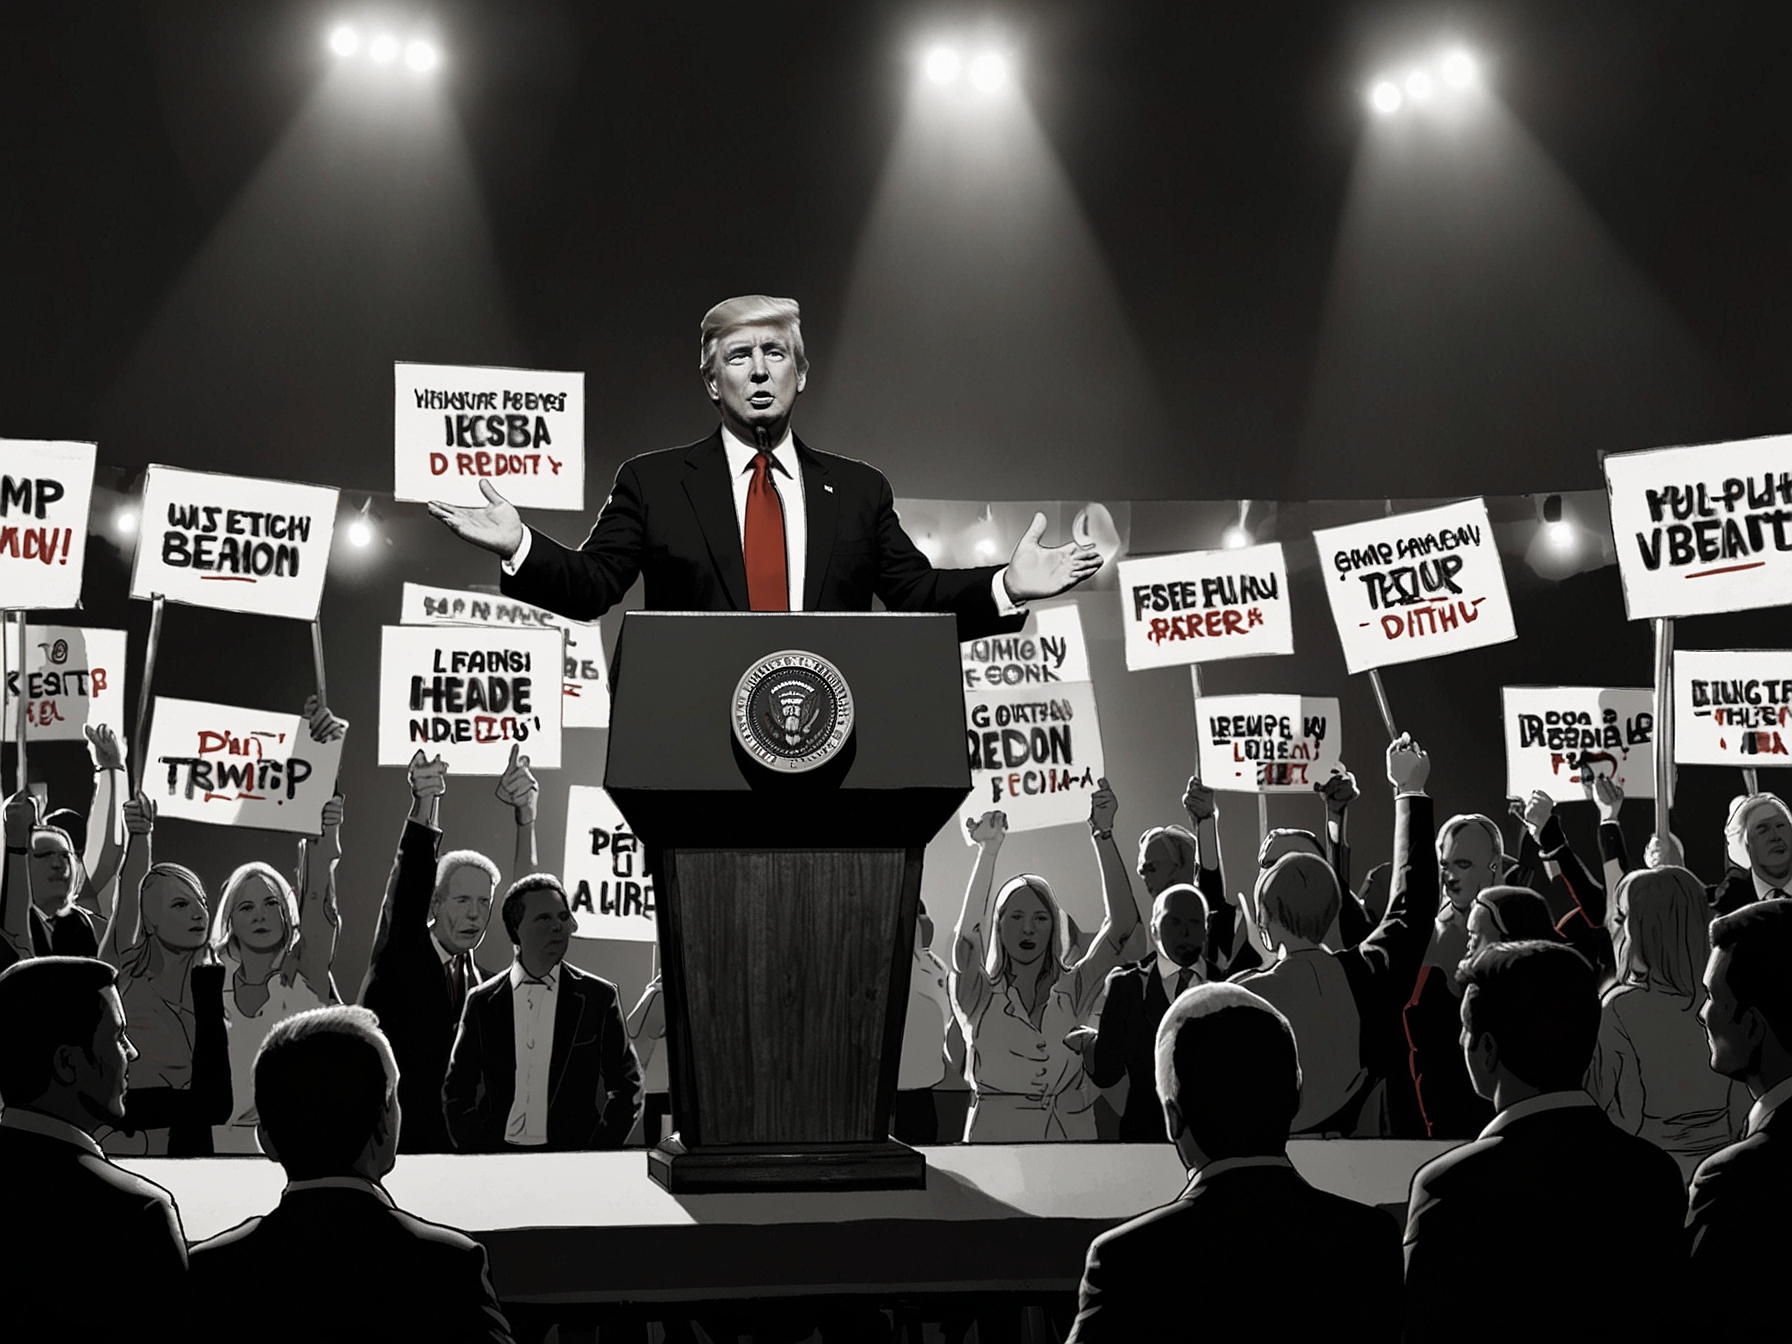 Illustration of President Trump's campaign rallying supporters with signs demanding drug tests for Joe Biden, set against a backdrop featuring the debate stage.